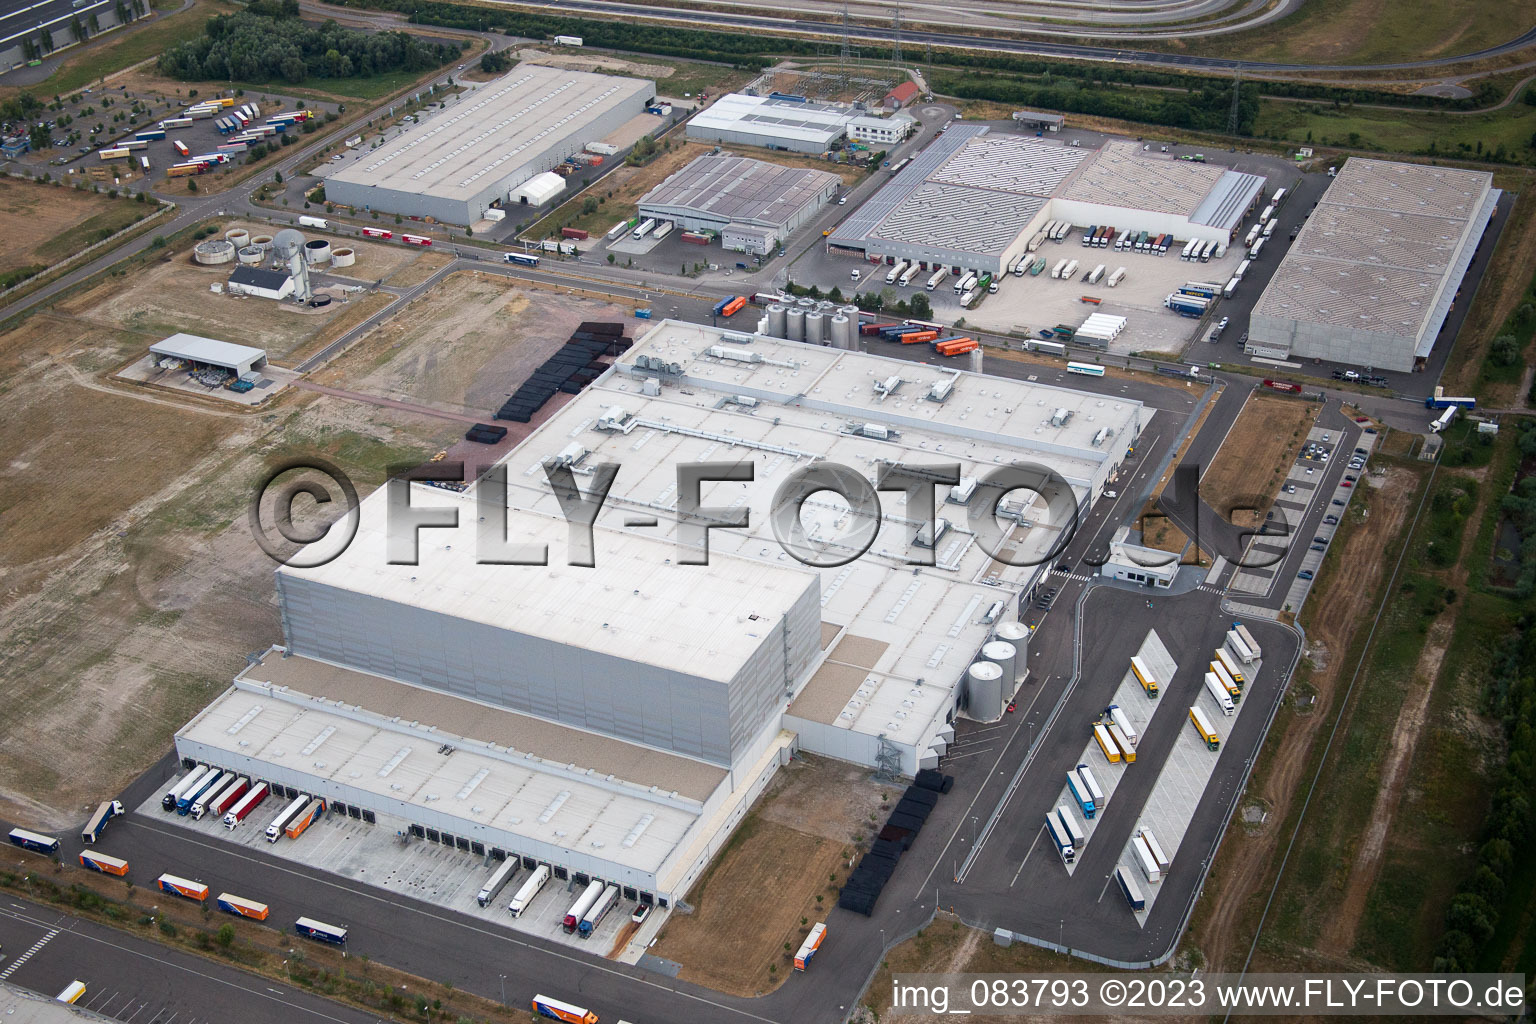 Oberwald industrial area in Wörth am Rhein in the state Rhineland-Palatinate, Germany from the drone perspective